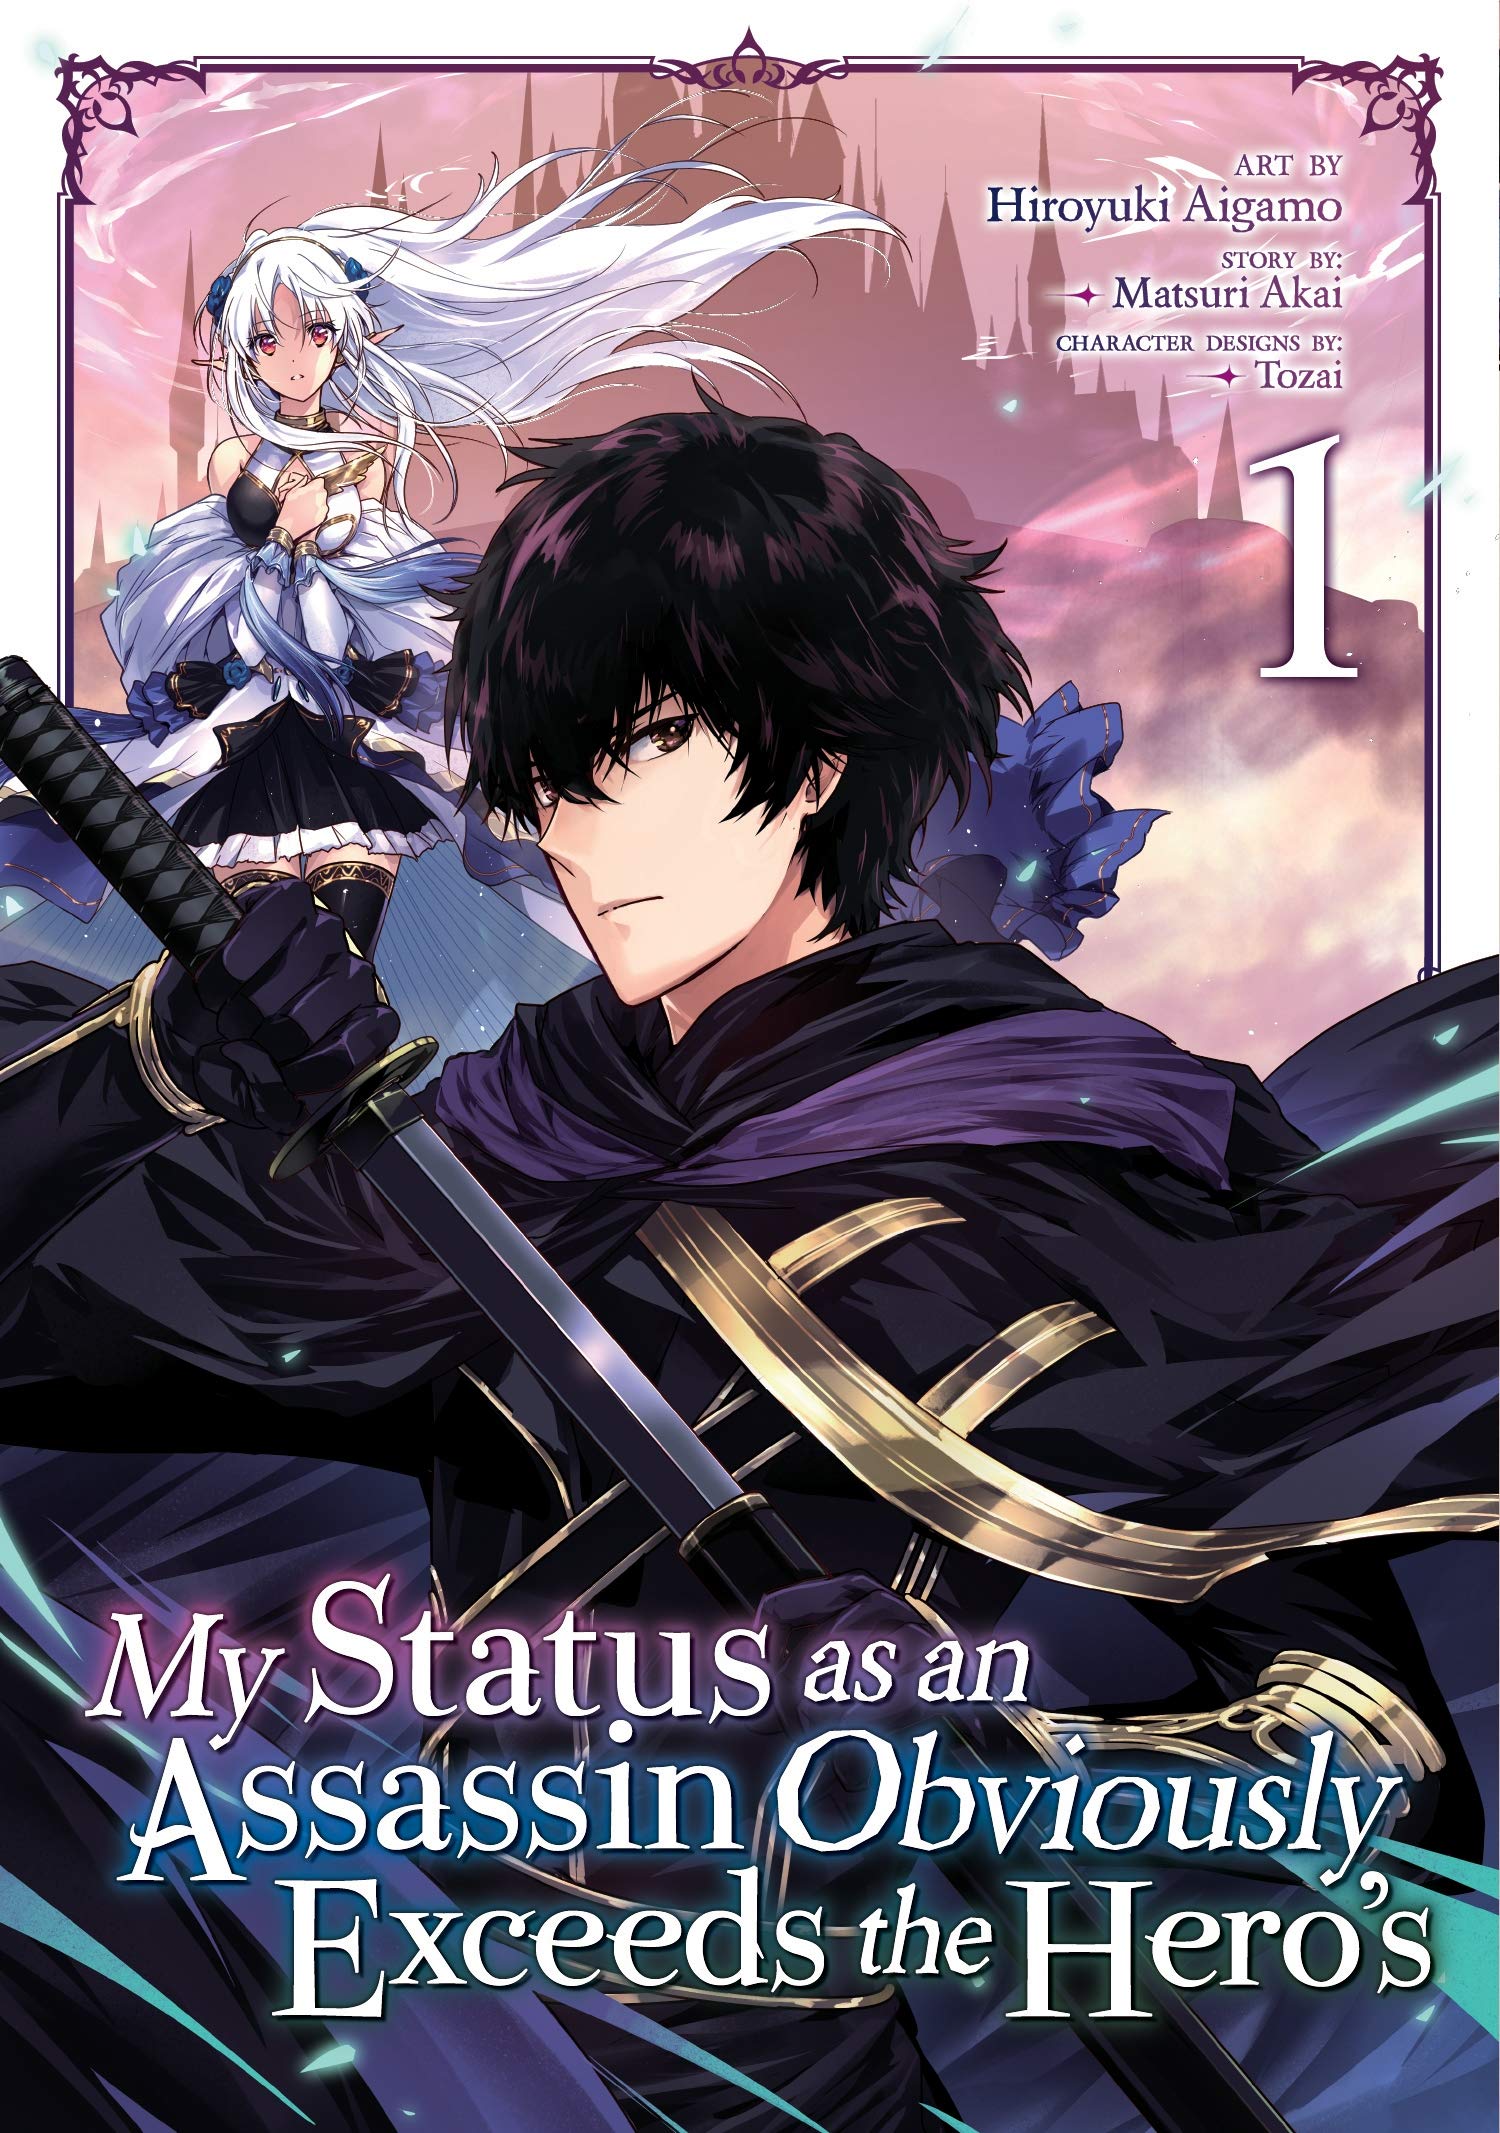 Image for "My Status as an Assassin Obviously Exceeds the Hero’s (Manga) Vol. 1"